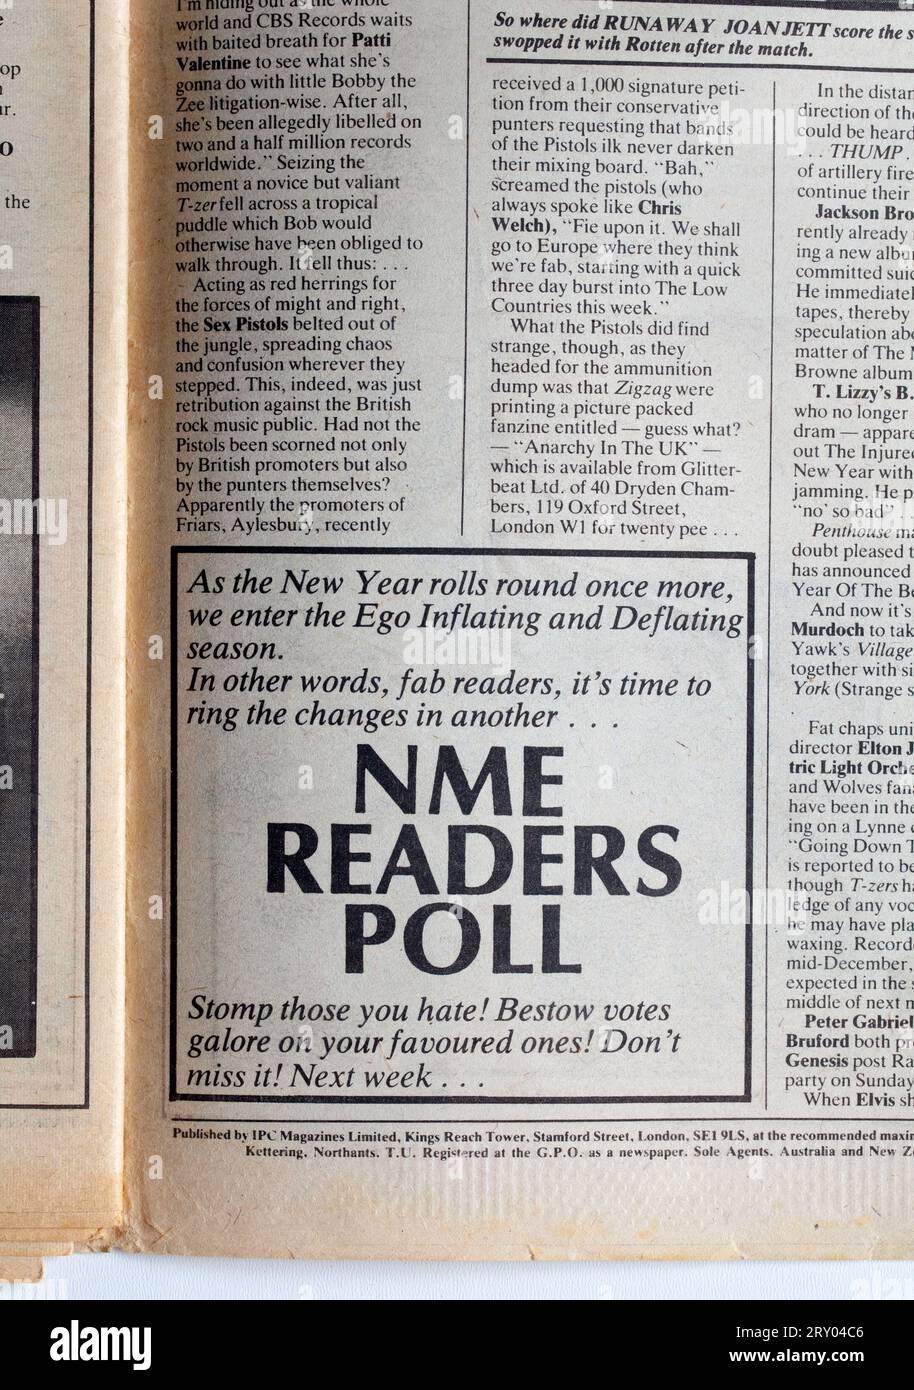 Advert for the NME Readers Poll in 1970s issue of NME New Musical Express Music Paper Stock Photo